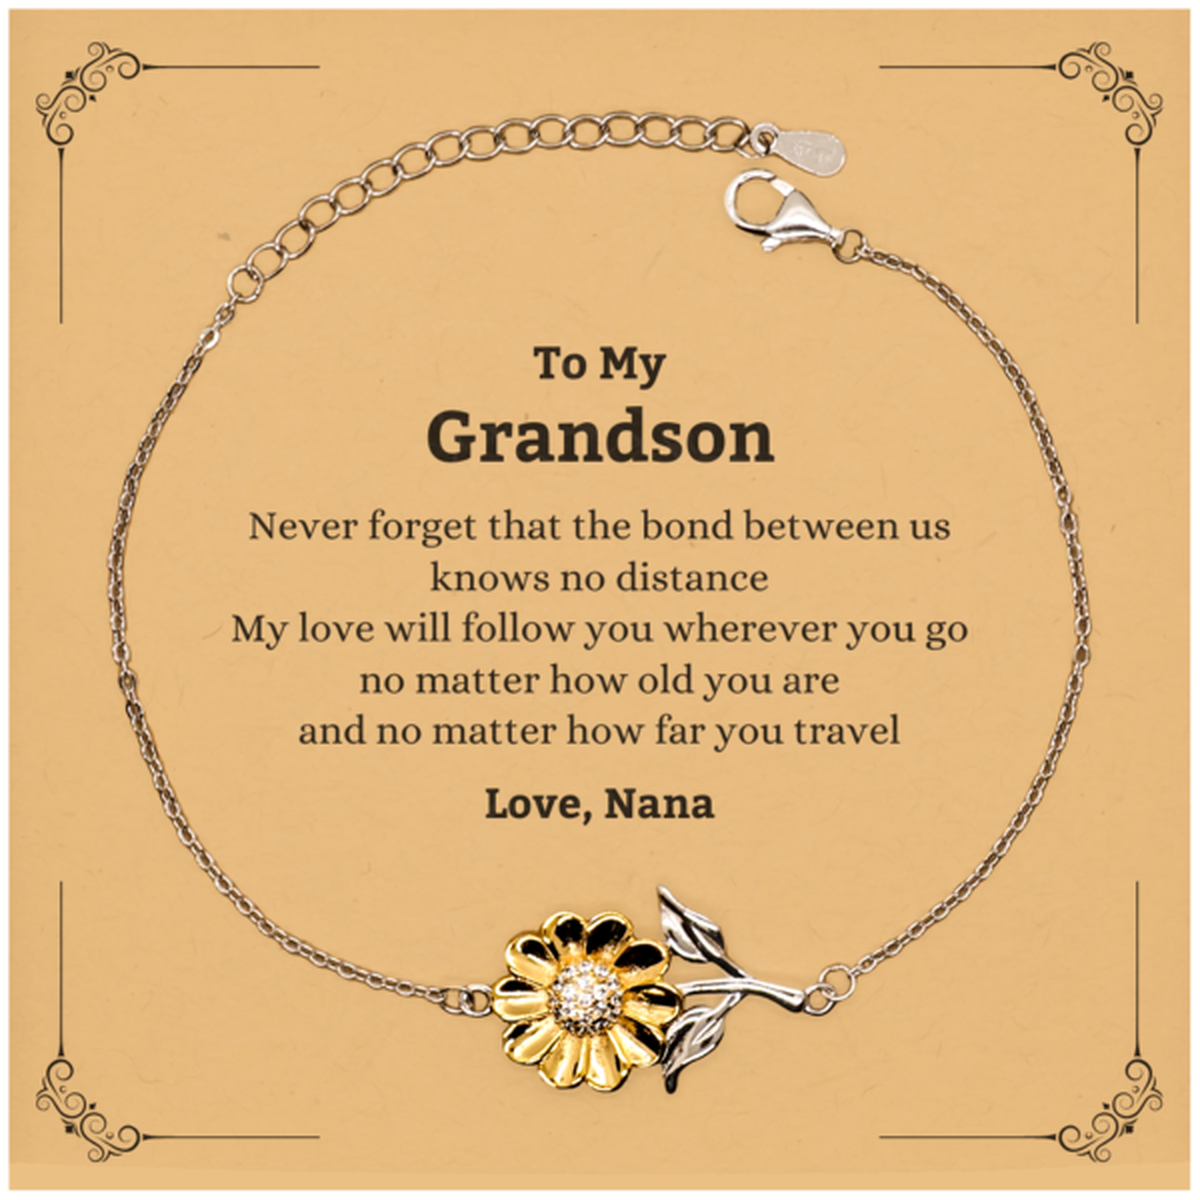 Grandson Birthday Gifts from Nana, Adjustable Sunflower Bracelet for Grandson Christmas Graduation Unique Gifts Grandson Never forget that the bond between us knows no distance. Love, Nana